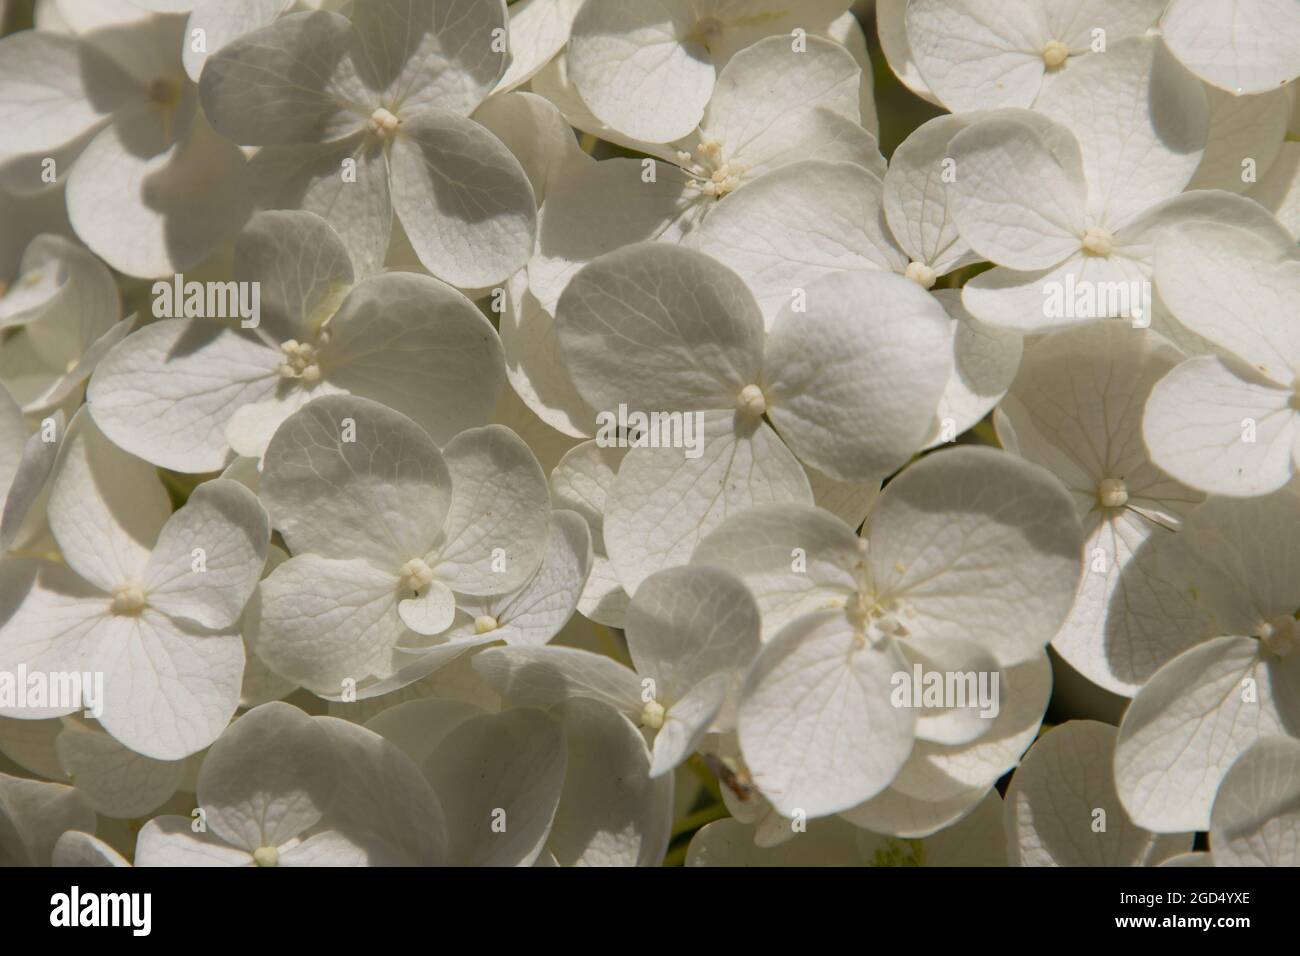 Full frame white floral pattern of a Hydrangea, also called Hydrangea or Hortensie Stock Photo